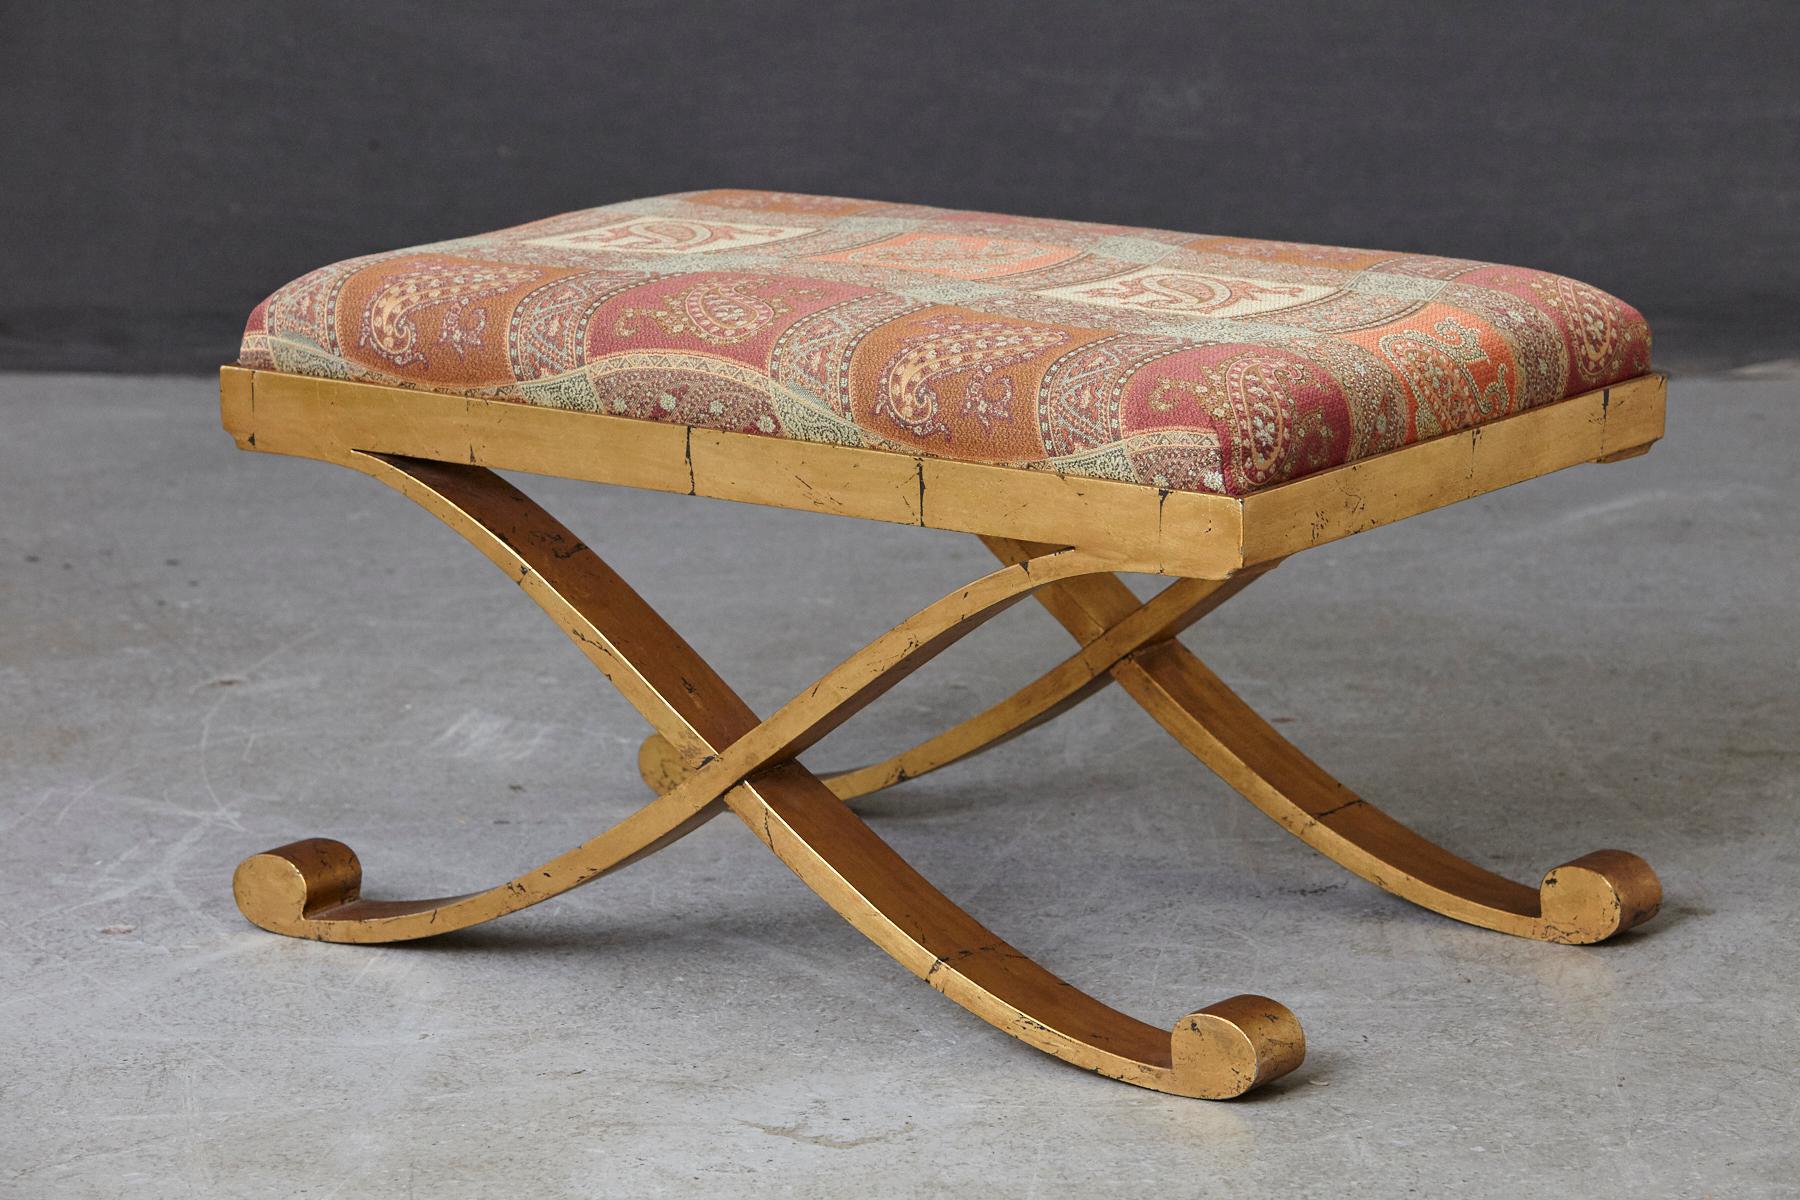 Lovely gild patinated metal bench with cross legs upholstered in Paisley fabric. Solid and sturdy metal construction, nice patina to the gild.